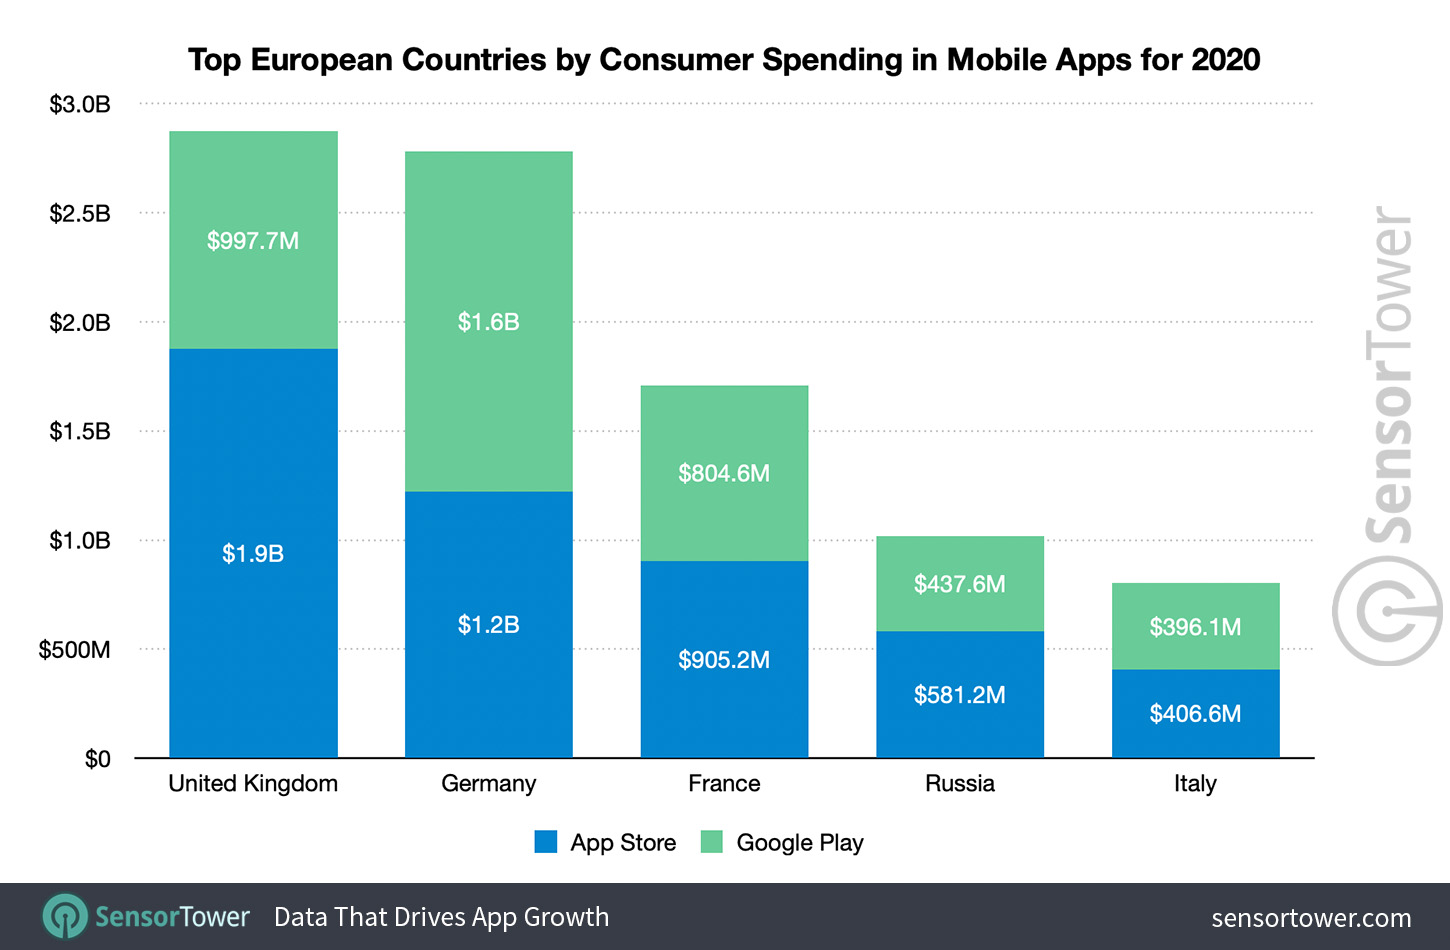 Top European Countries by Consumer Spending in Mobile Apps for 2020